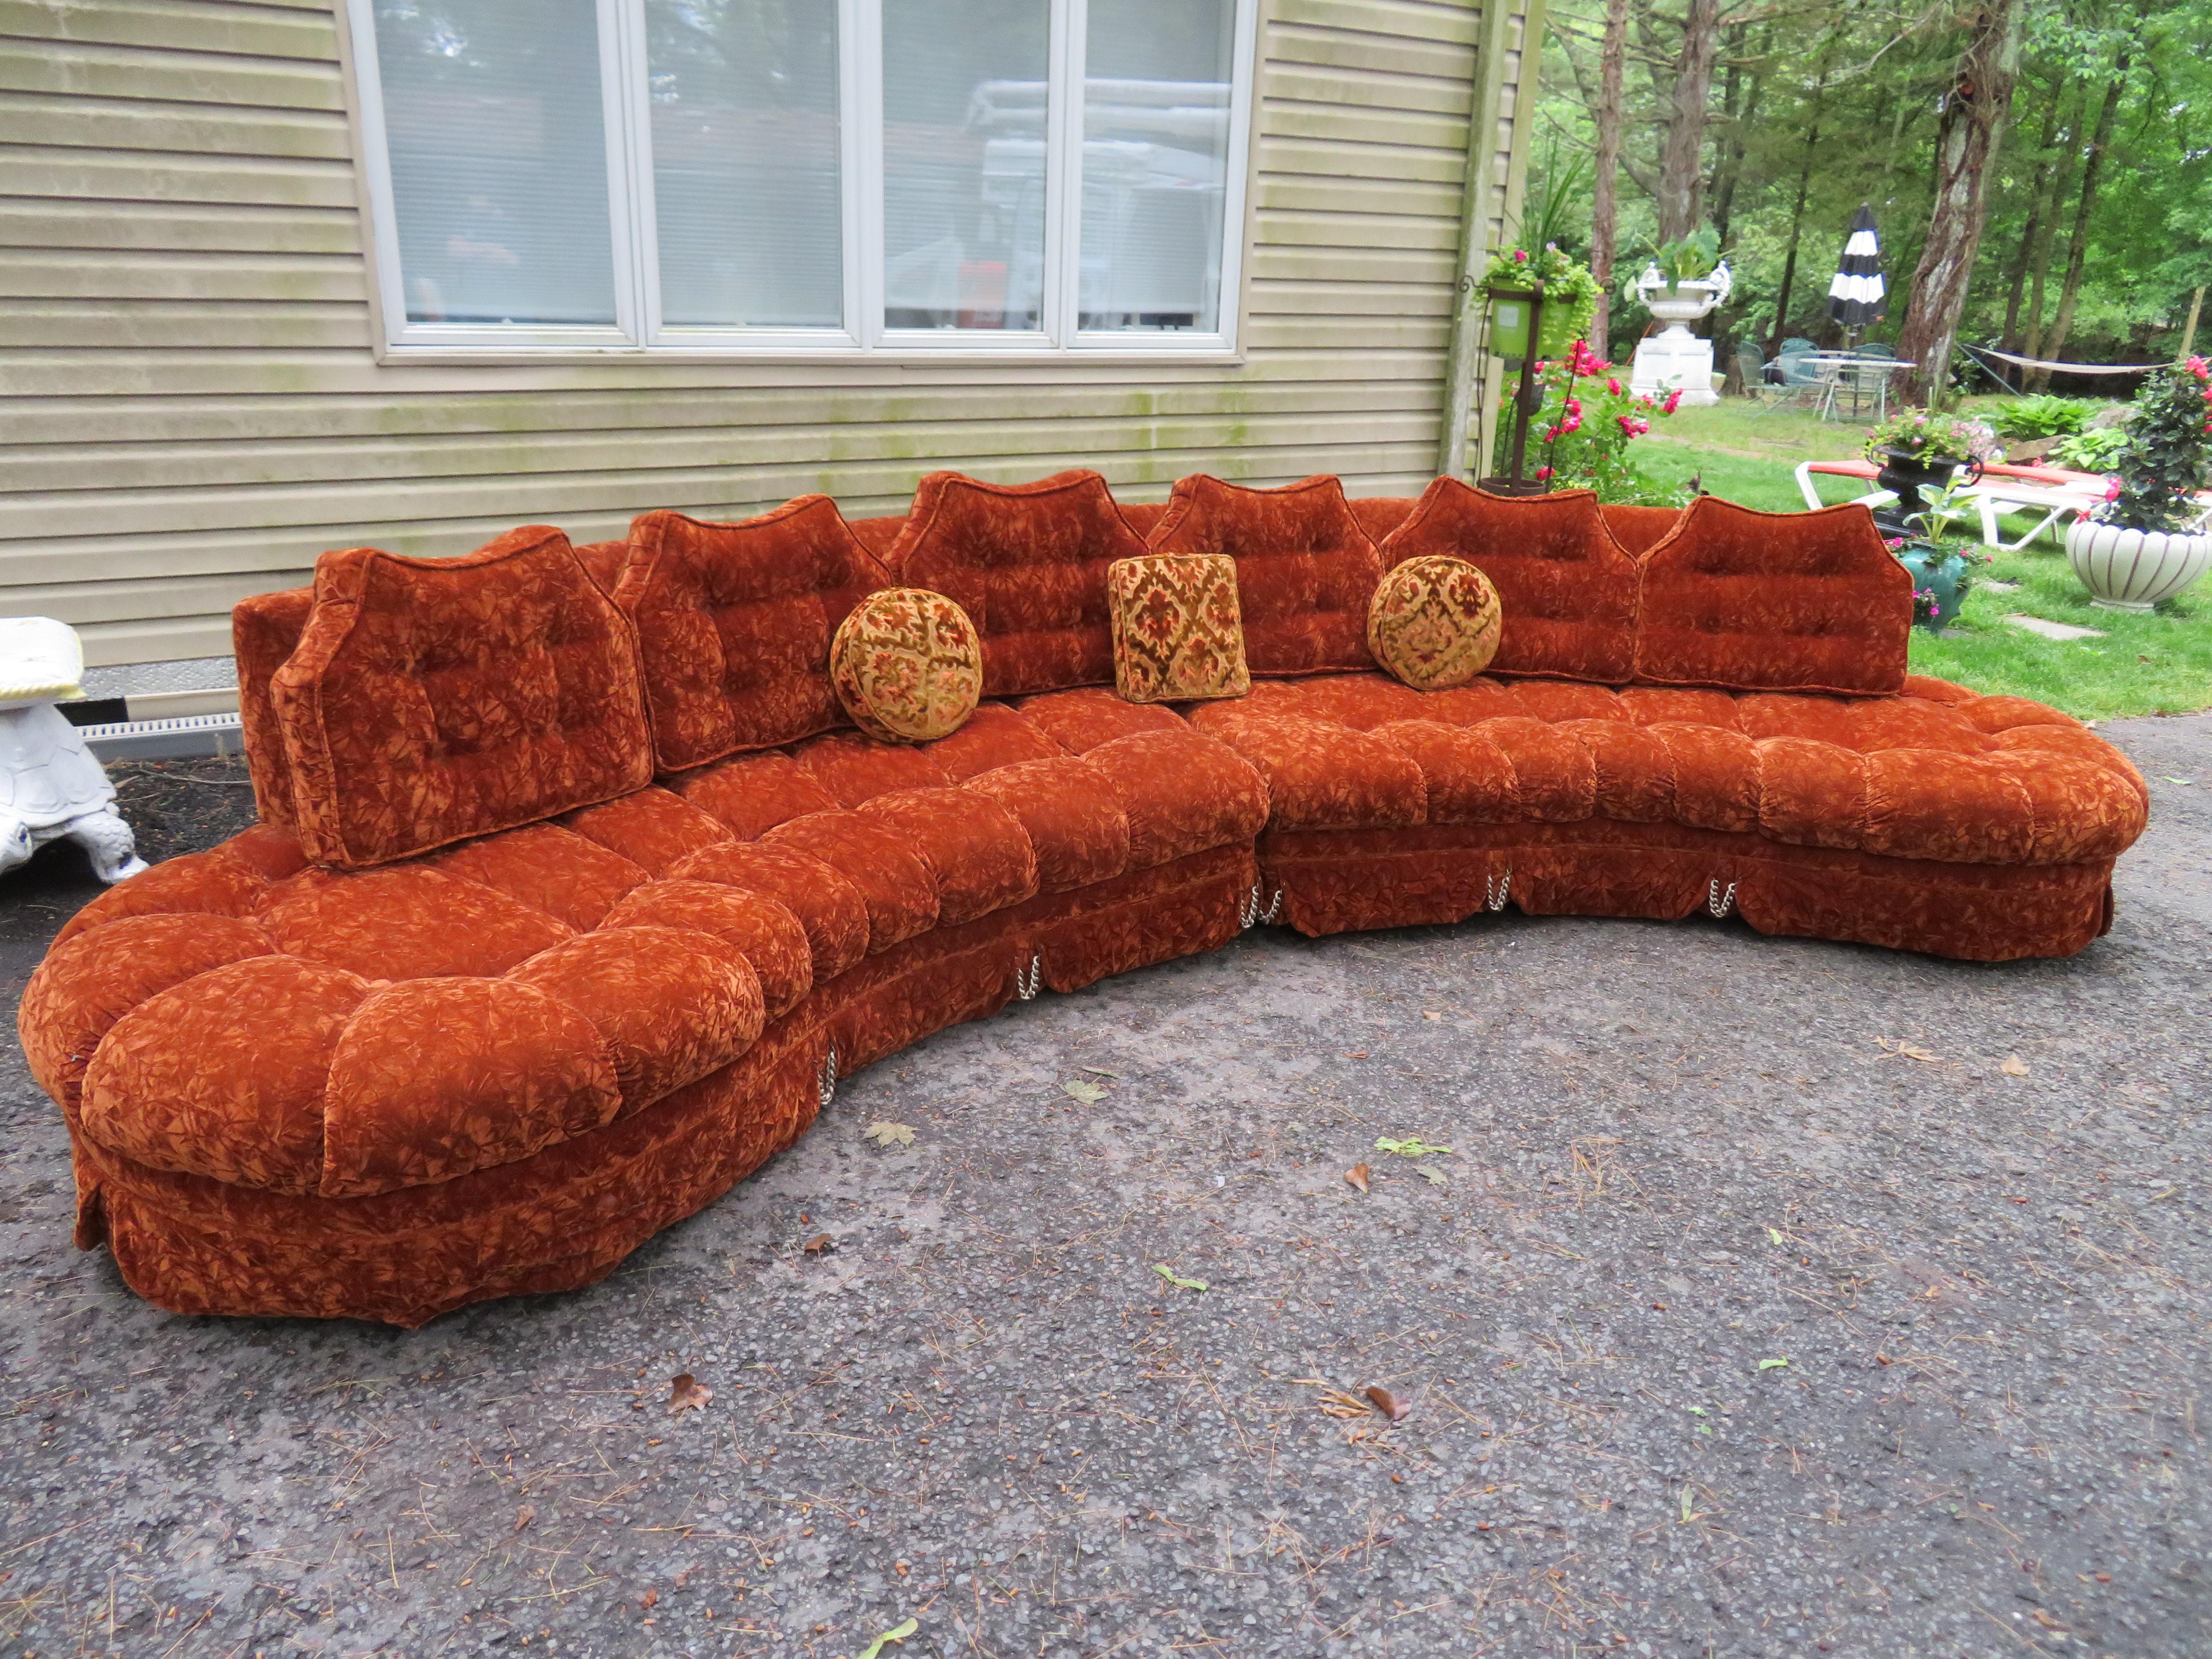 Gorgeous curved serpentine two-piece Adrian Pearsall style sofa sectional. There are no words to describe how fabulous this sofa sectional is with it's original custom tufted crushed orange velvet and amazing pleated skirt with actual chains for